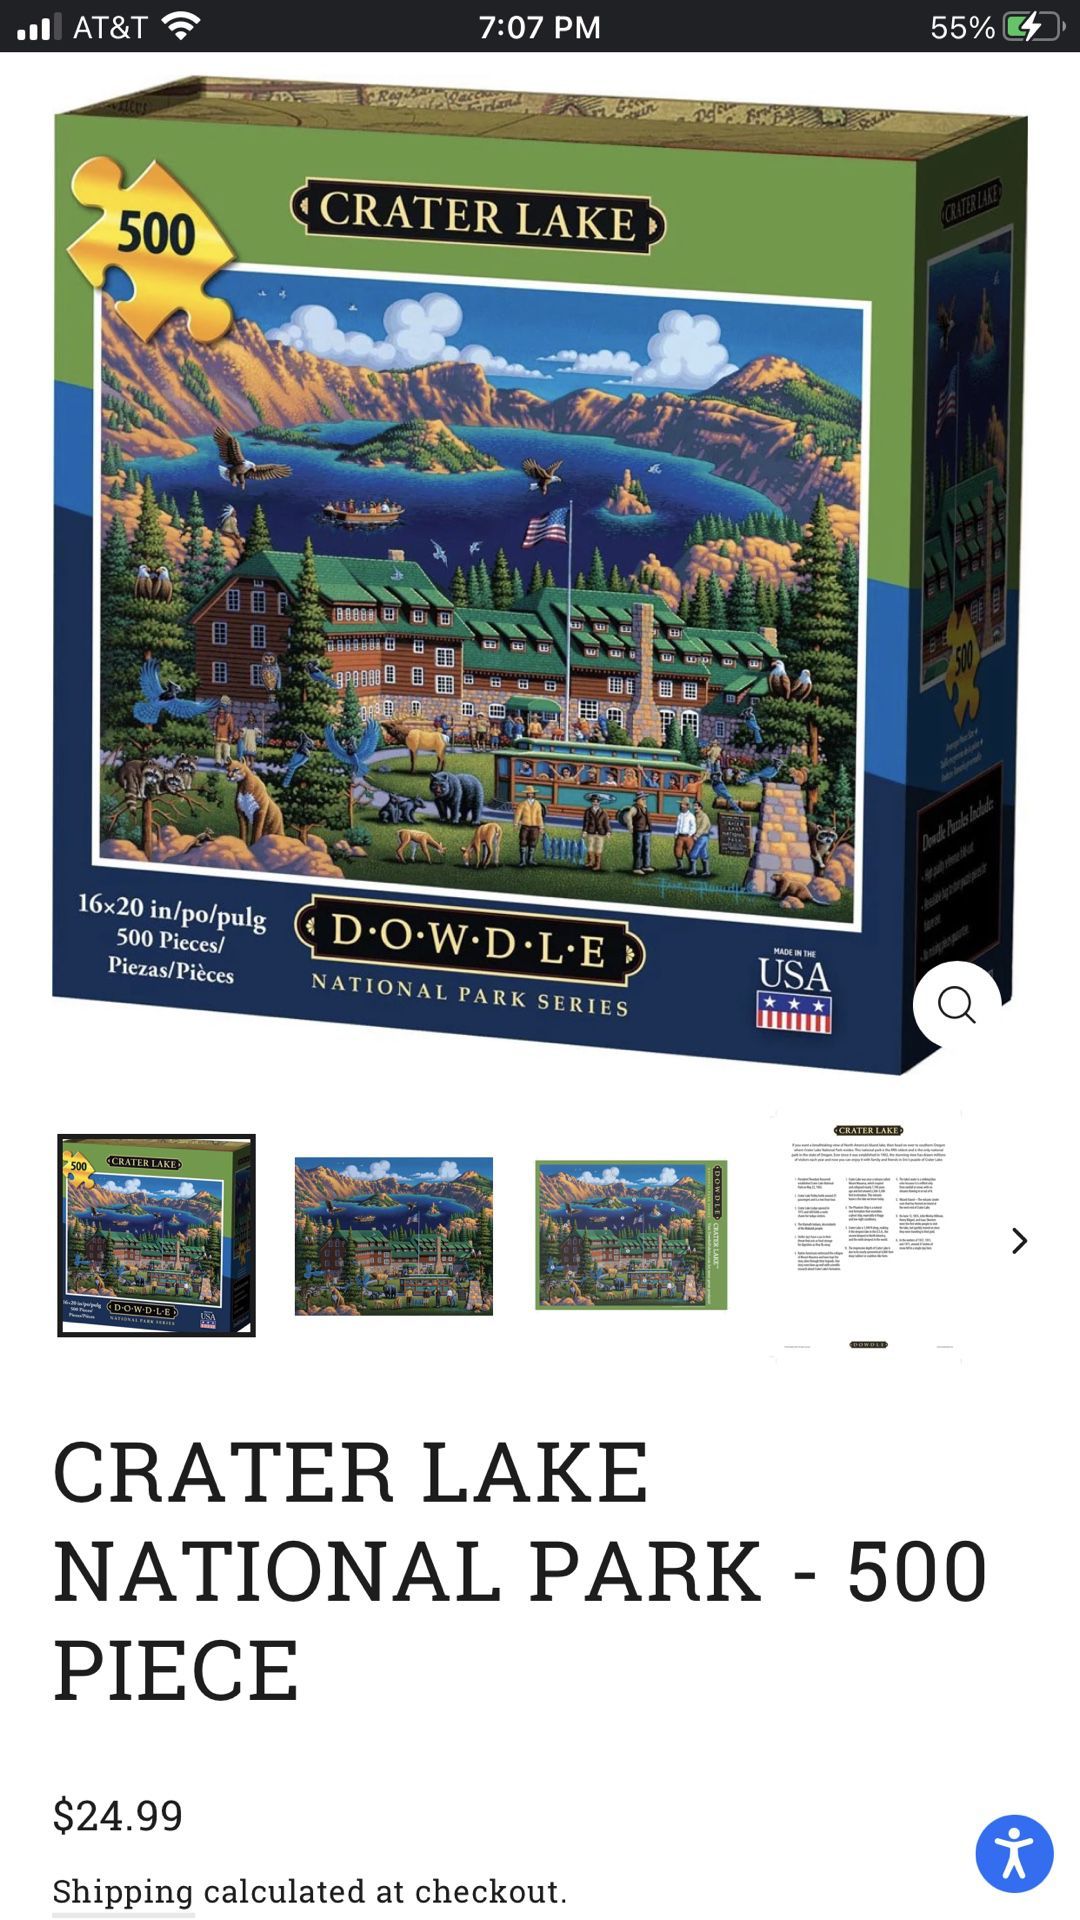 New Dowdle Crater Lake 500 Pc. Puzzle